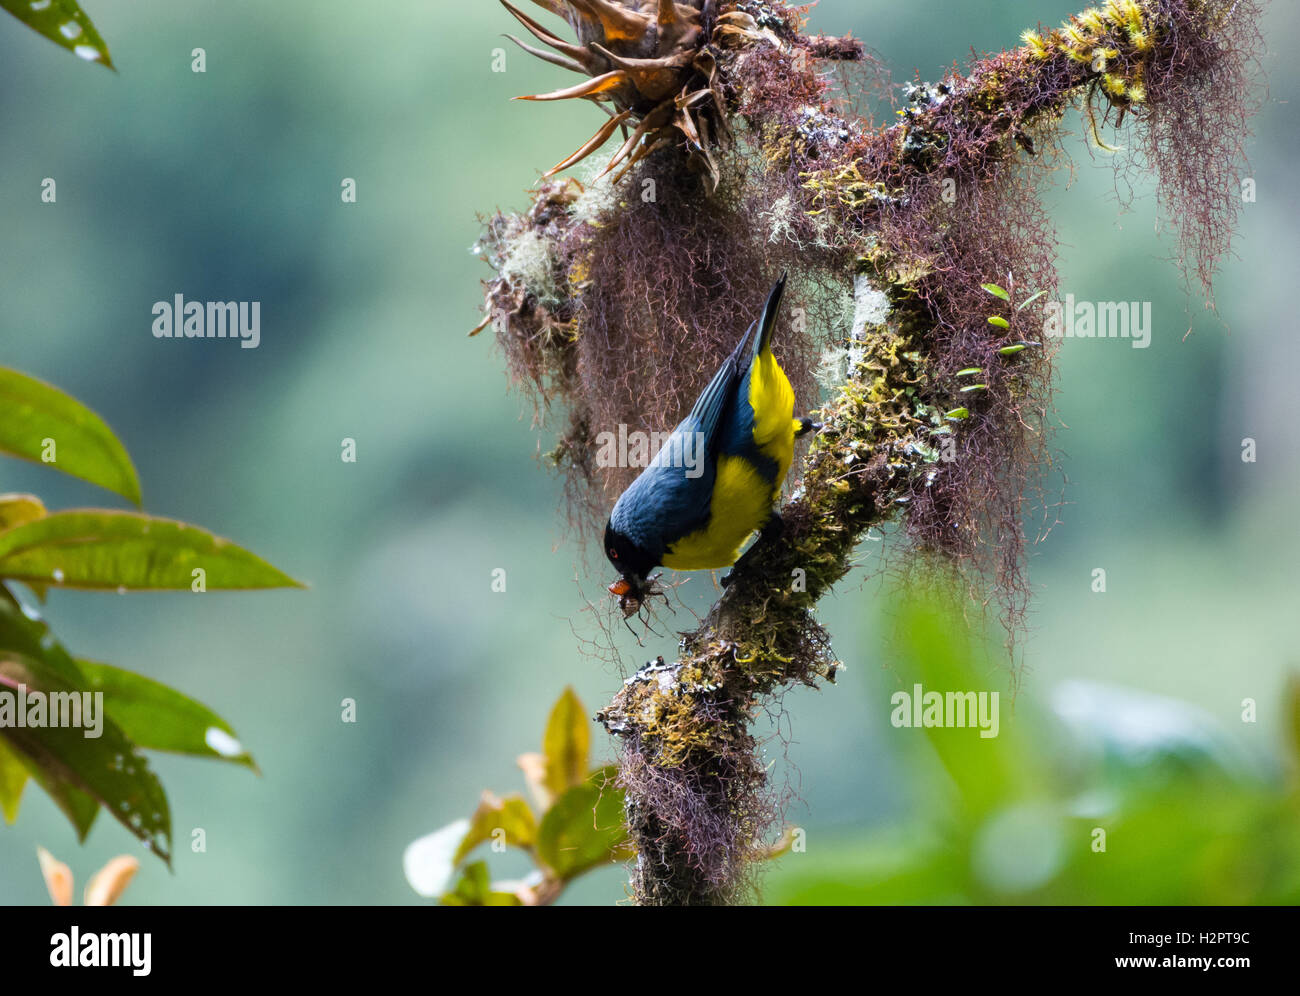 A Hooded Mountain Tanager (Buthraupis montana) caught a bug in cloud forest. Ecuador, South America. Stock Photo